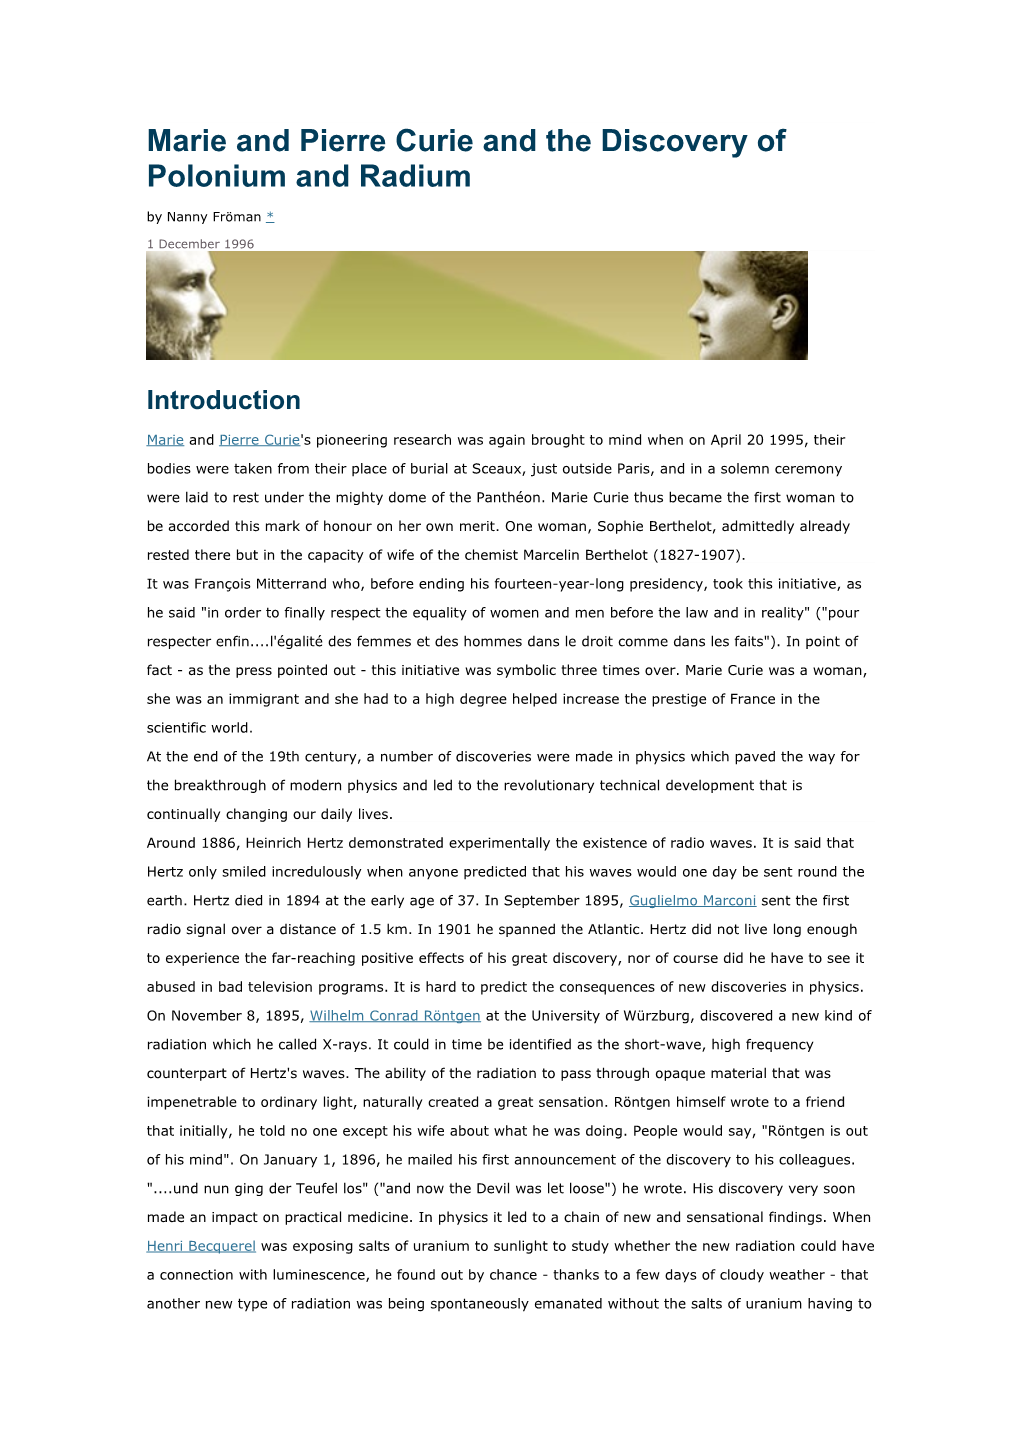 Marie and Pierre Curie and the Discovery of Polonium and Radium